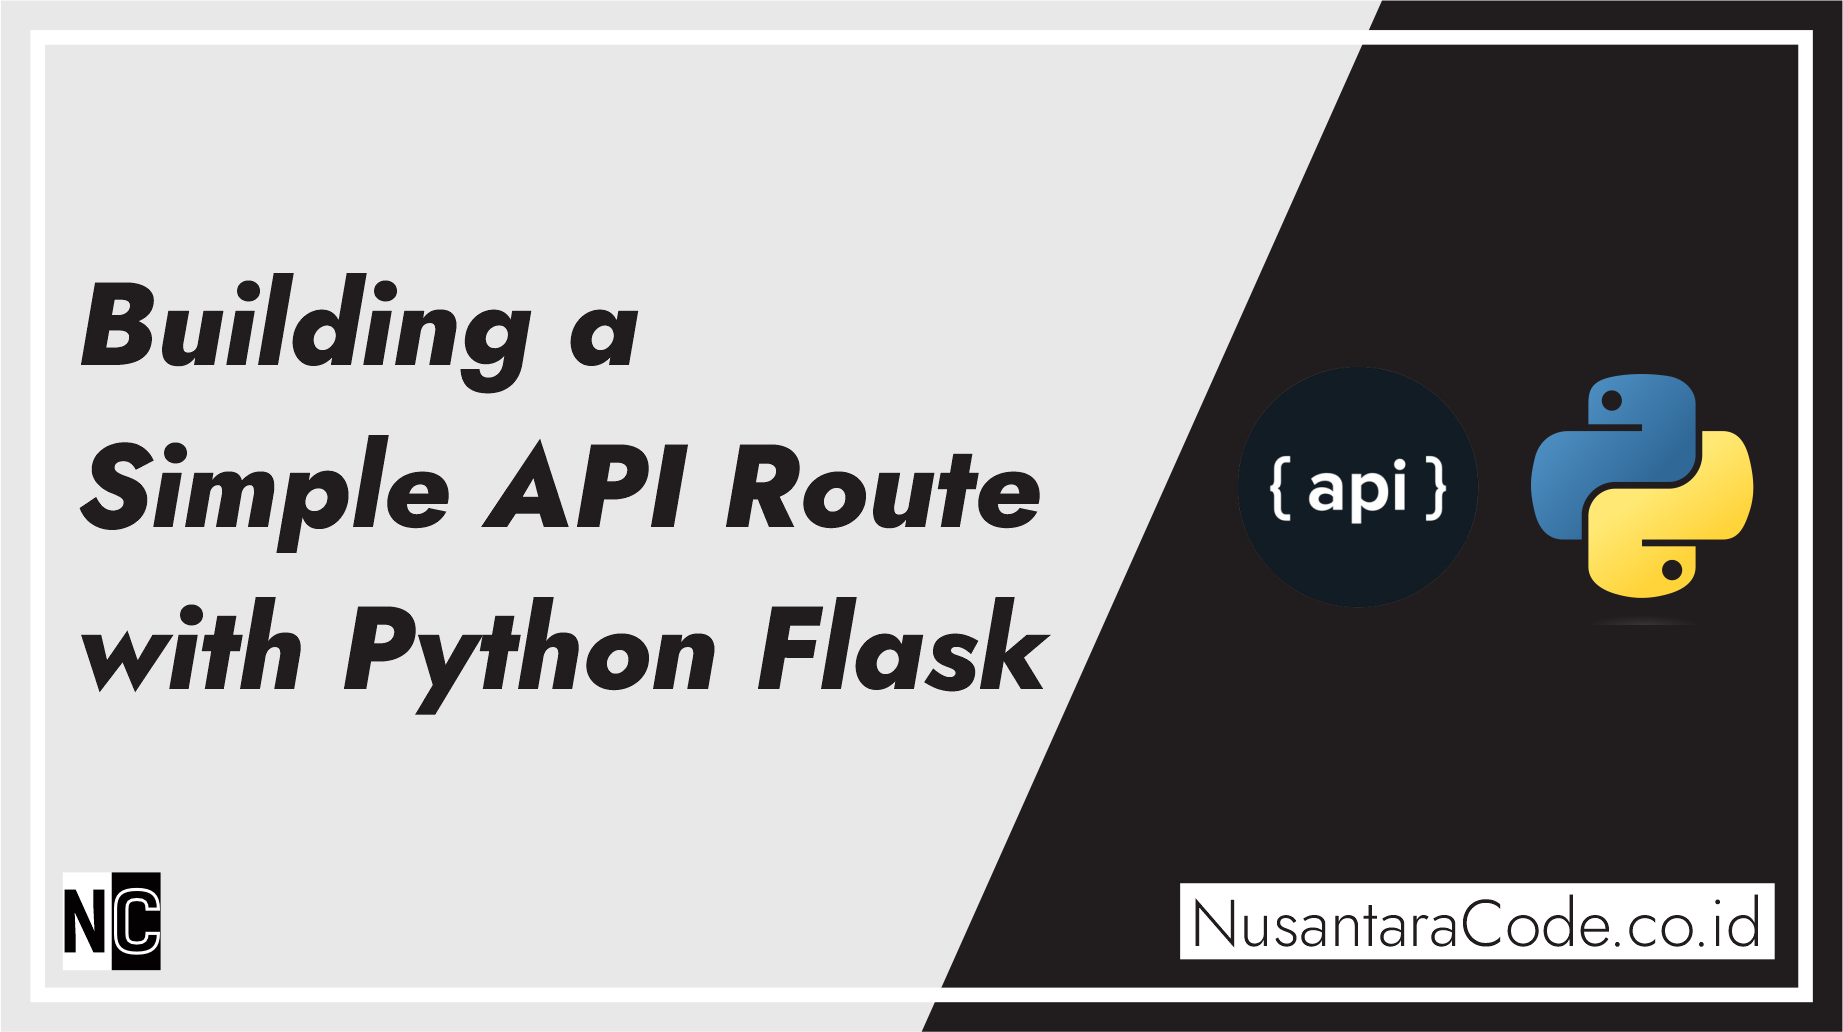 Building a Simple API Route with Python Flask